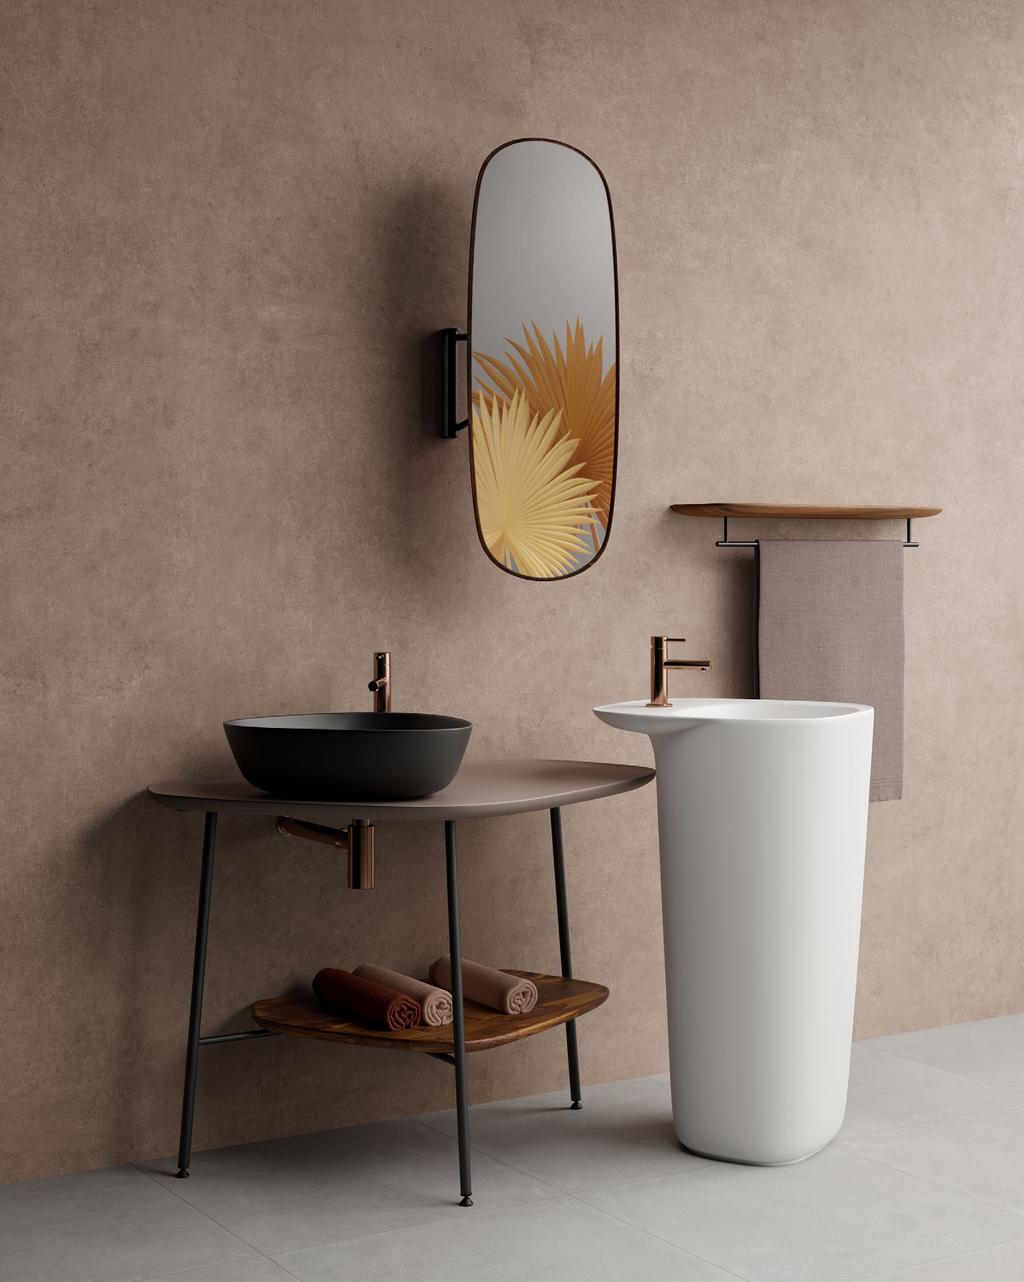 Sharing mirrors s wall-hanging mirror rotates and moves in all